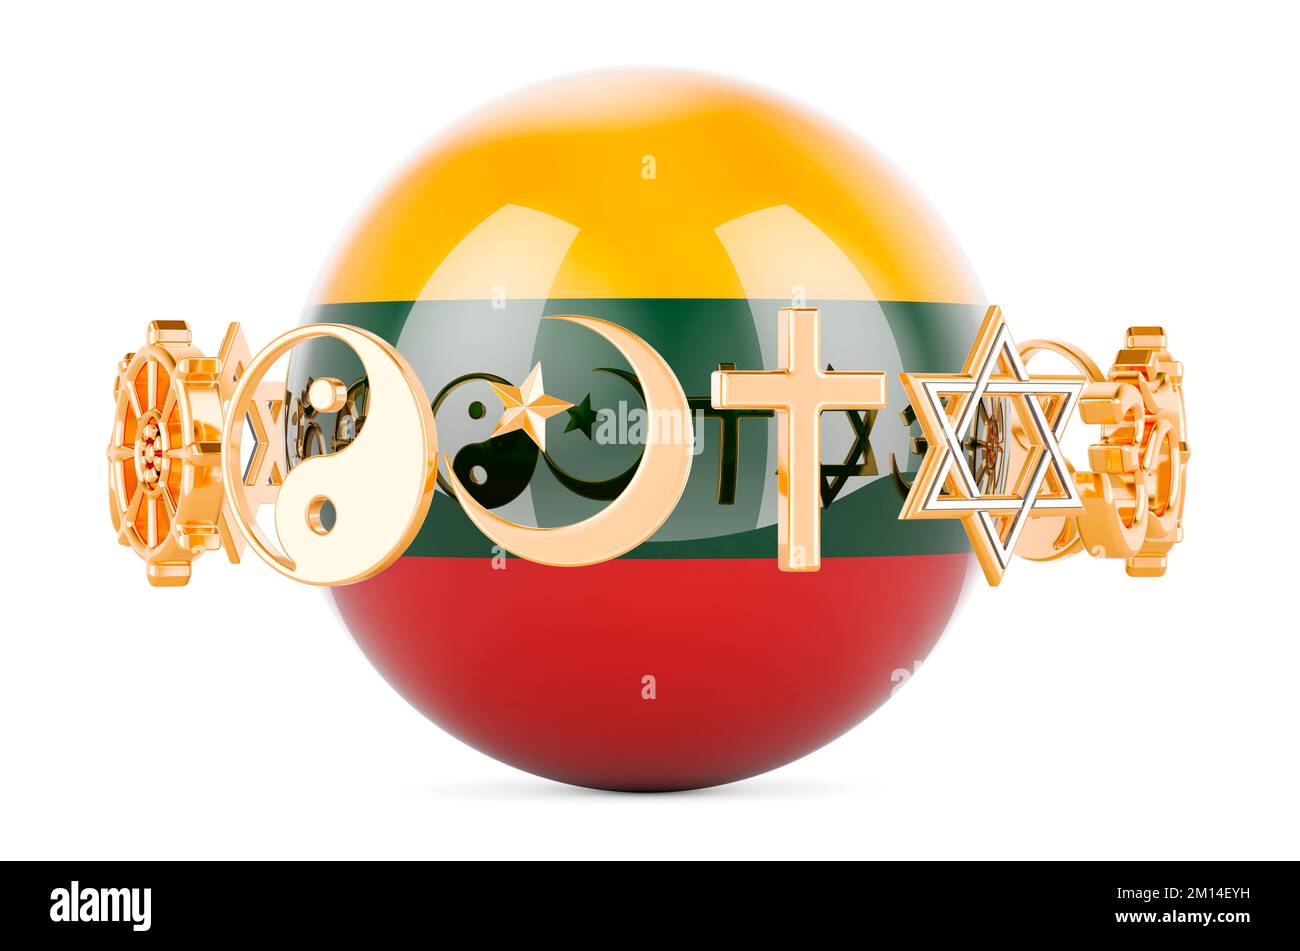 Lithuanian flag painted on sphere with religions symbols around, 3D rendering isolated on white background Stock Photo